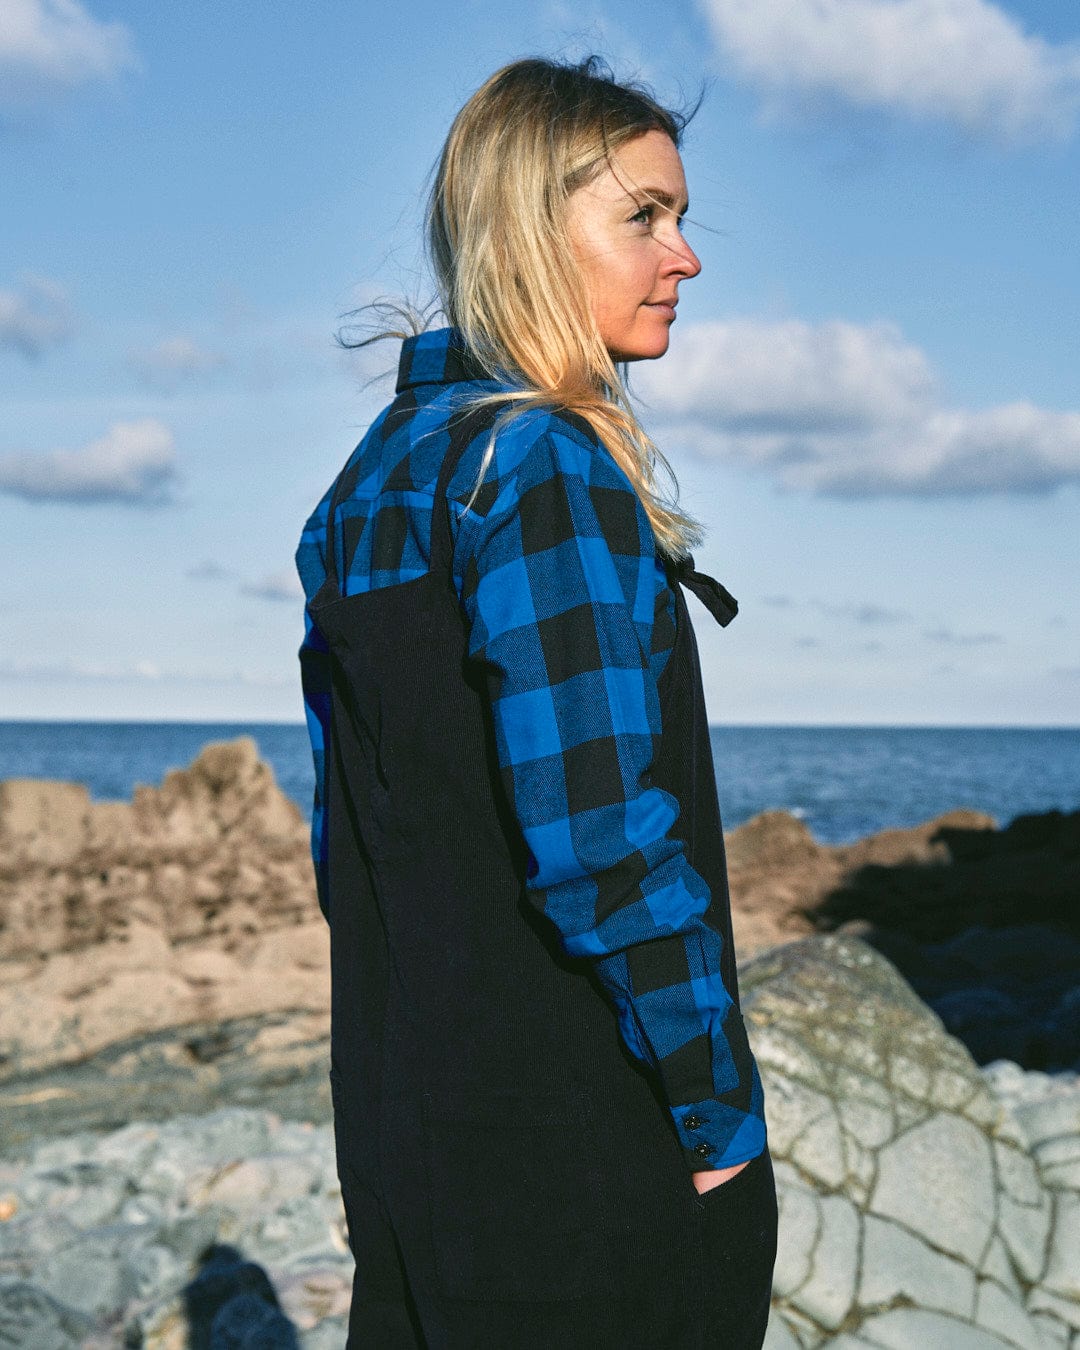 A fashion-conscious woman with long blonde hair, dressed in a Saltrock Nancy - Womens Cord Jumpsuit - Dark Blue and black overalls, stands on rocky terrain near the ocean, looking into the distance.